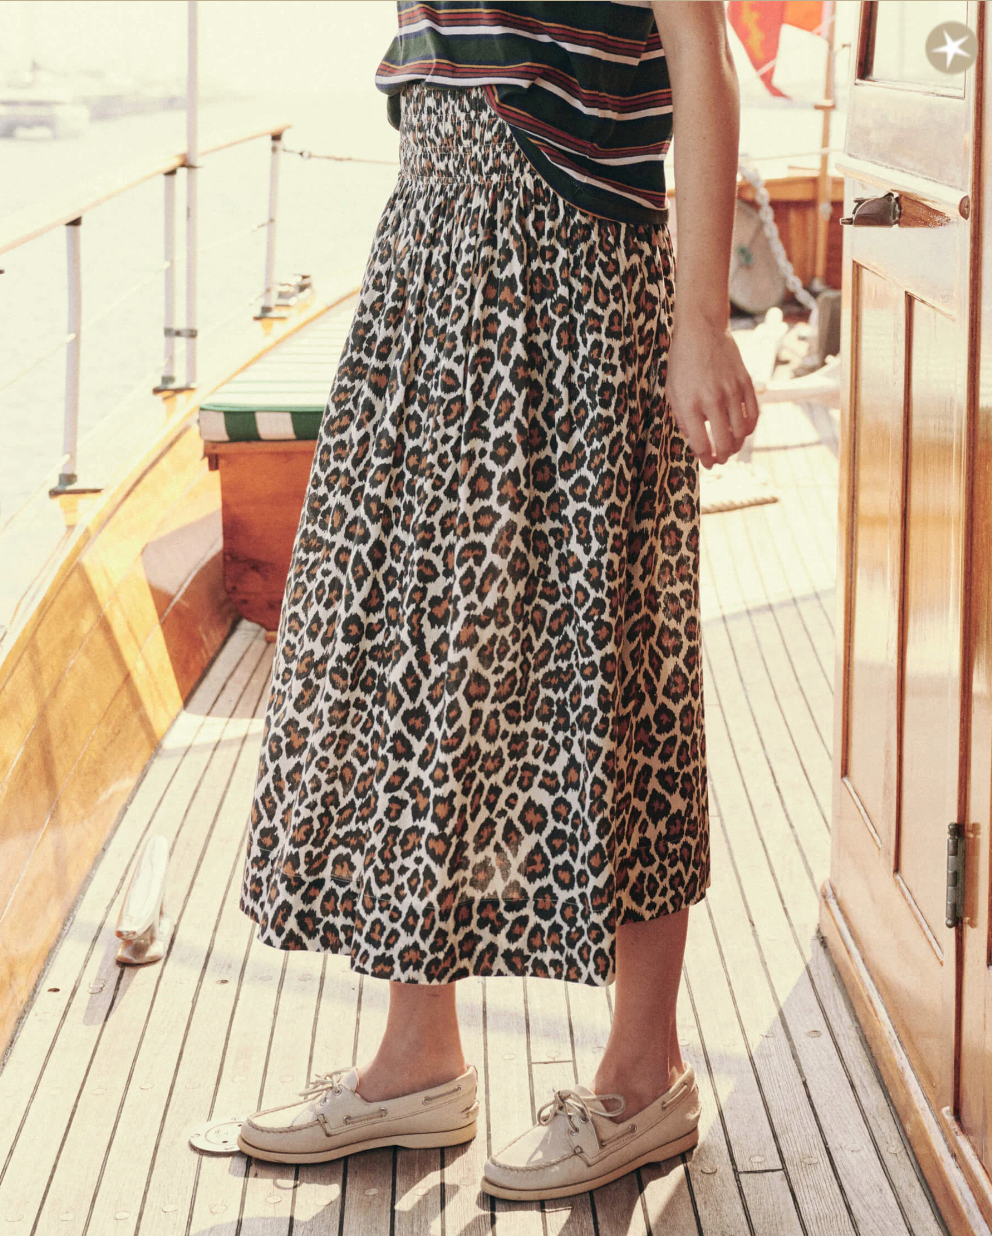 A person stands on a wooden deck wearing a leopard print skirt, a striped shirt, and light-colored boat shoes. The person's face is not visible. In the background, there are wooden elements of what appears to be a boat. The outfit features The Viola Skirt by The Great Inc. with its wide smocked waistband.